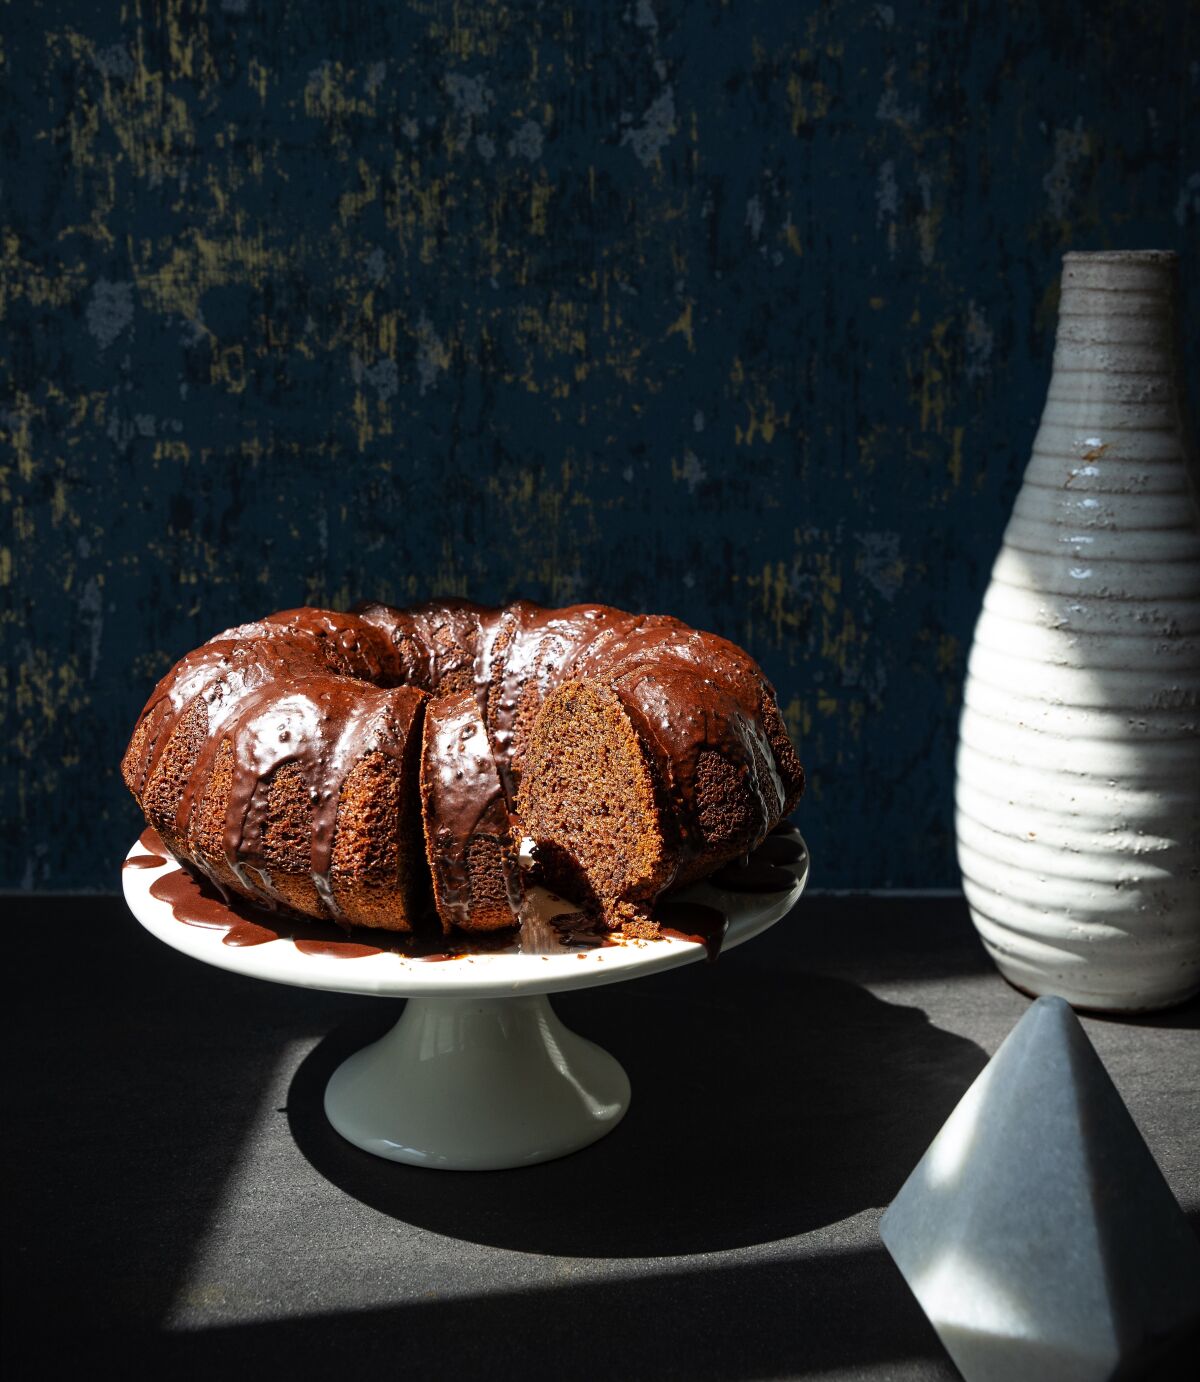 Olive oil makes this chocolate cake extra delicious.